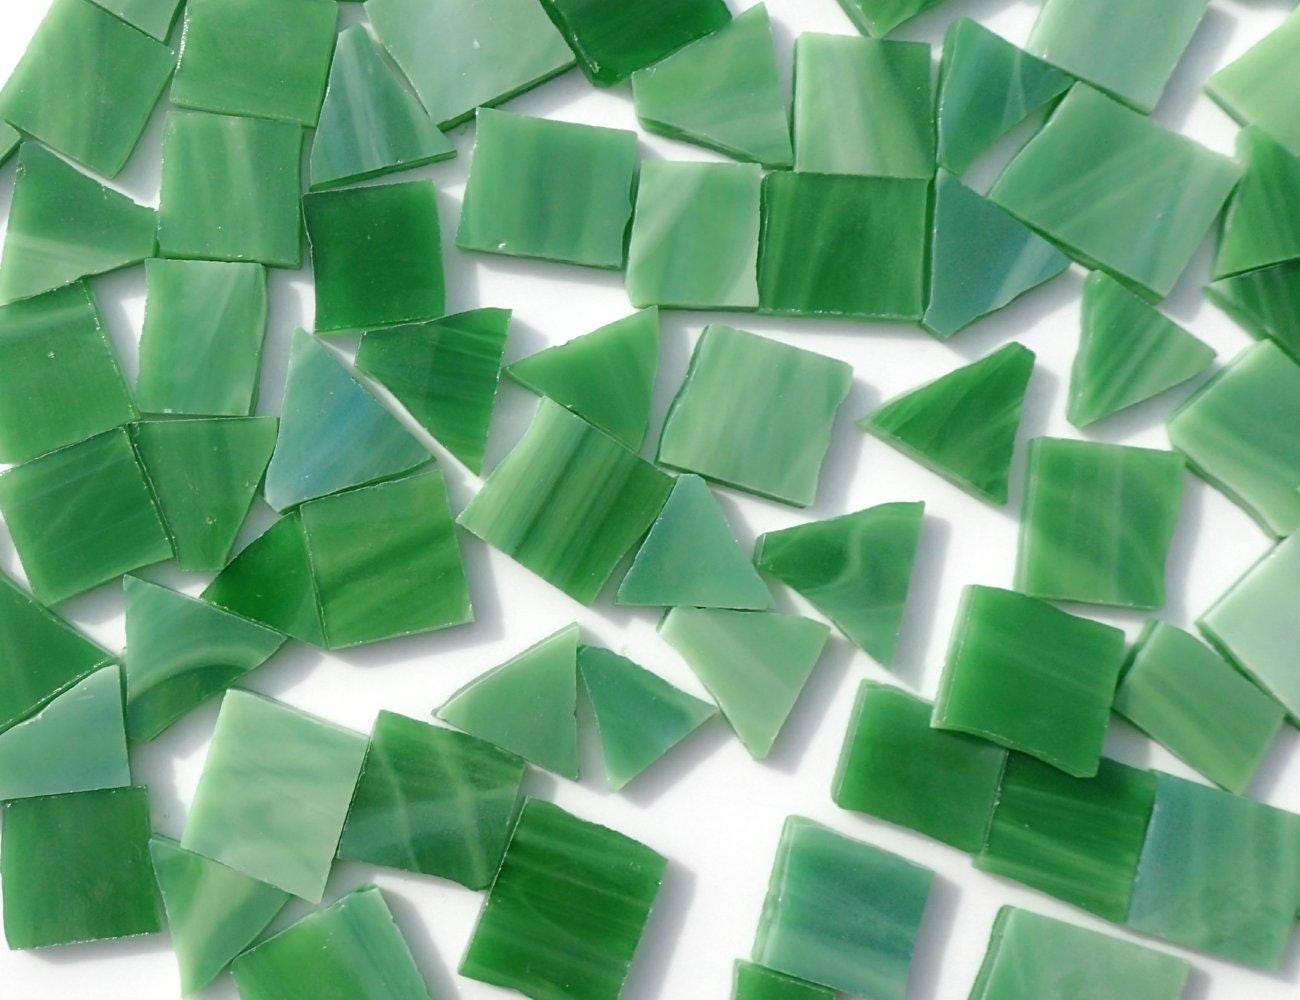 Stained Glass Mosaic Tiles in Fern Green - 1/2 Pound - Tumbled Glass in Shades of Pickle Green